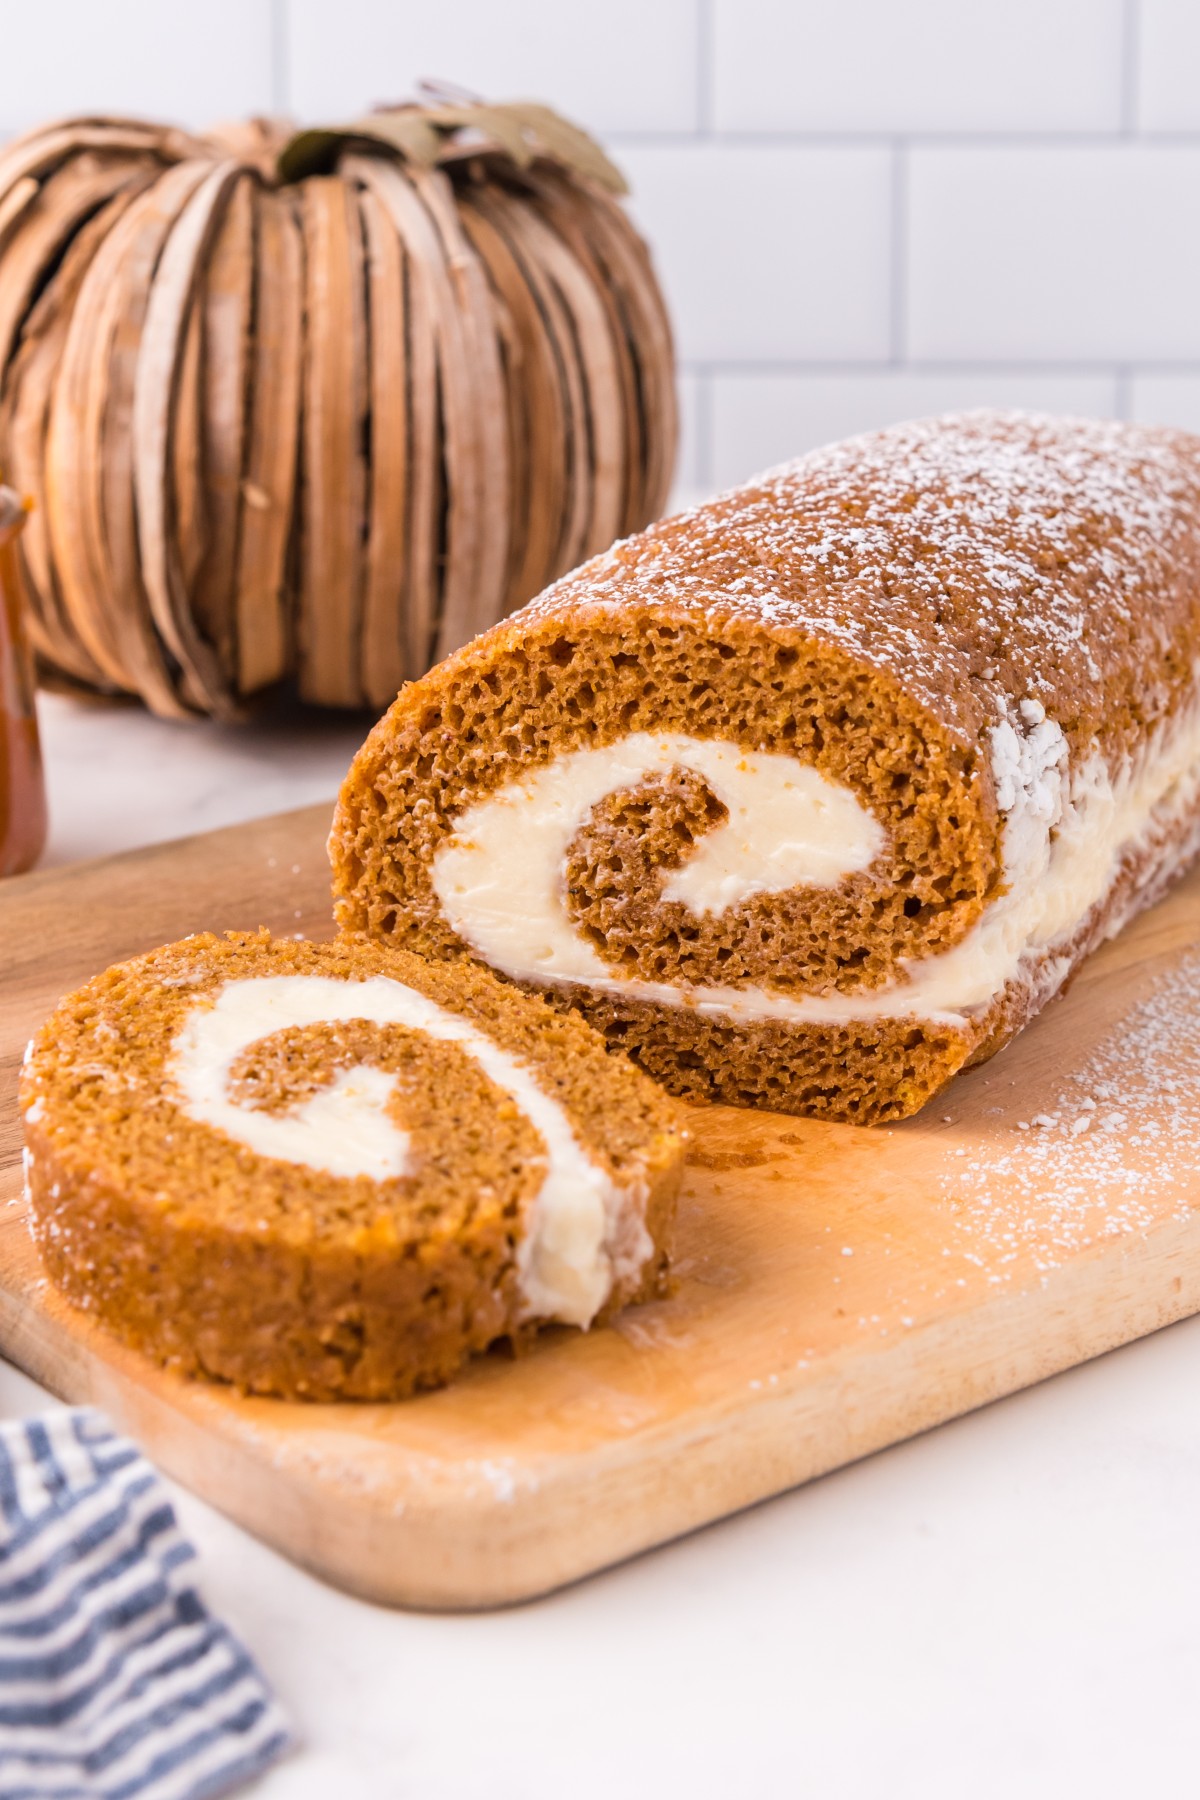 Slices of pumpkin roll on a wooden board.